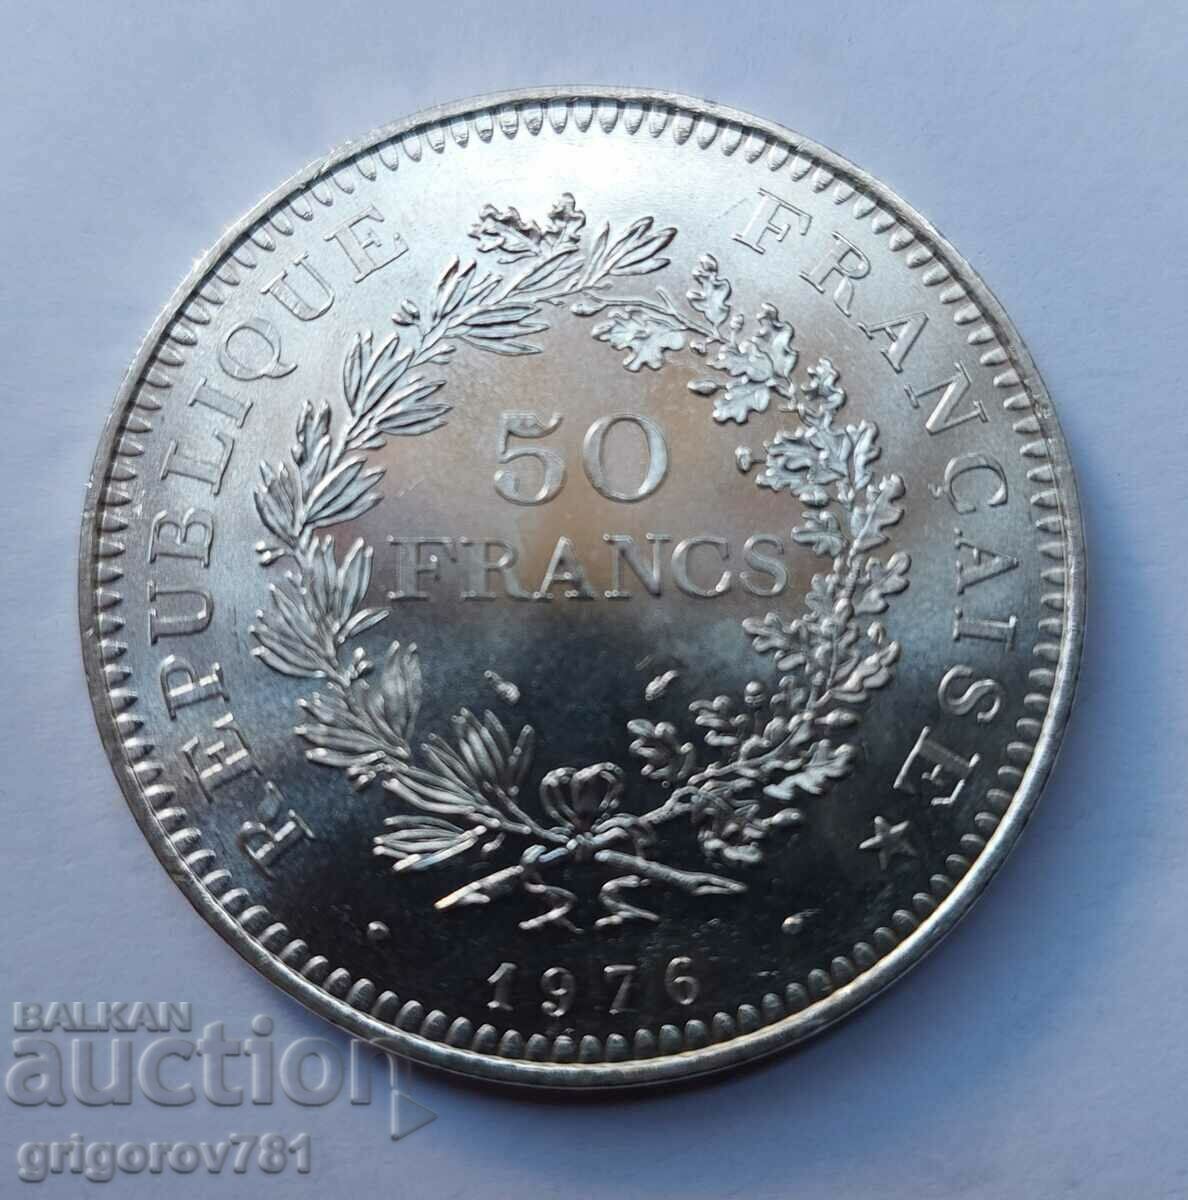 50 Francs Silver France 1976 - Silver Coin #22